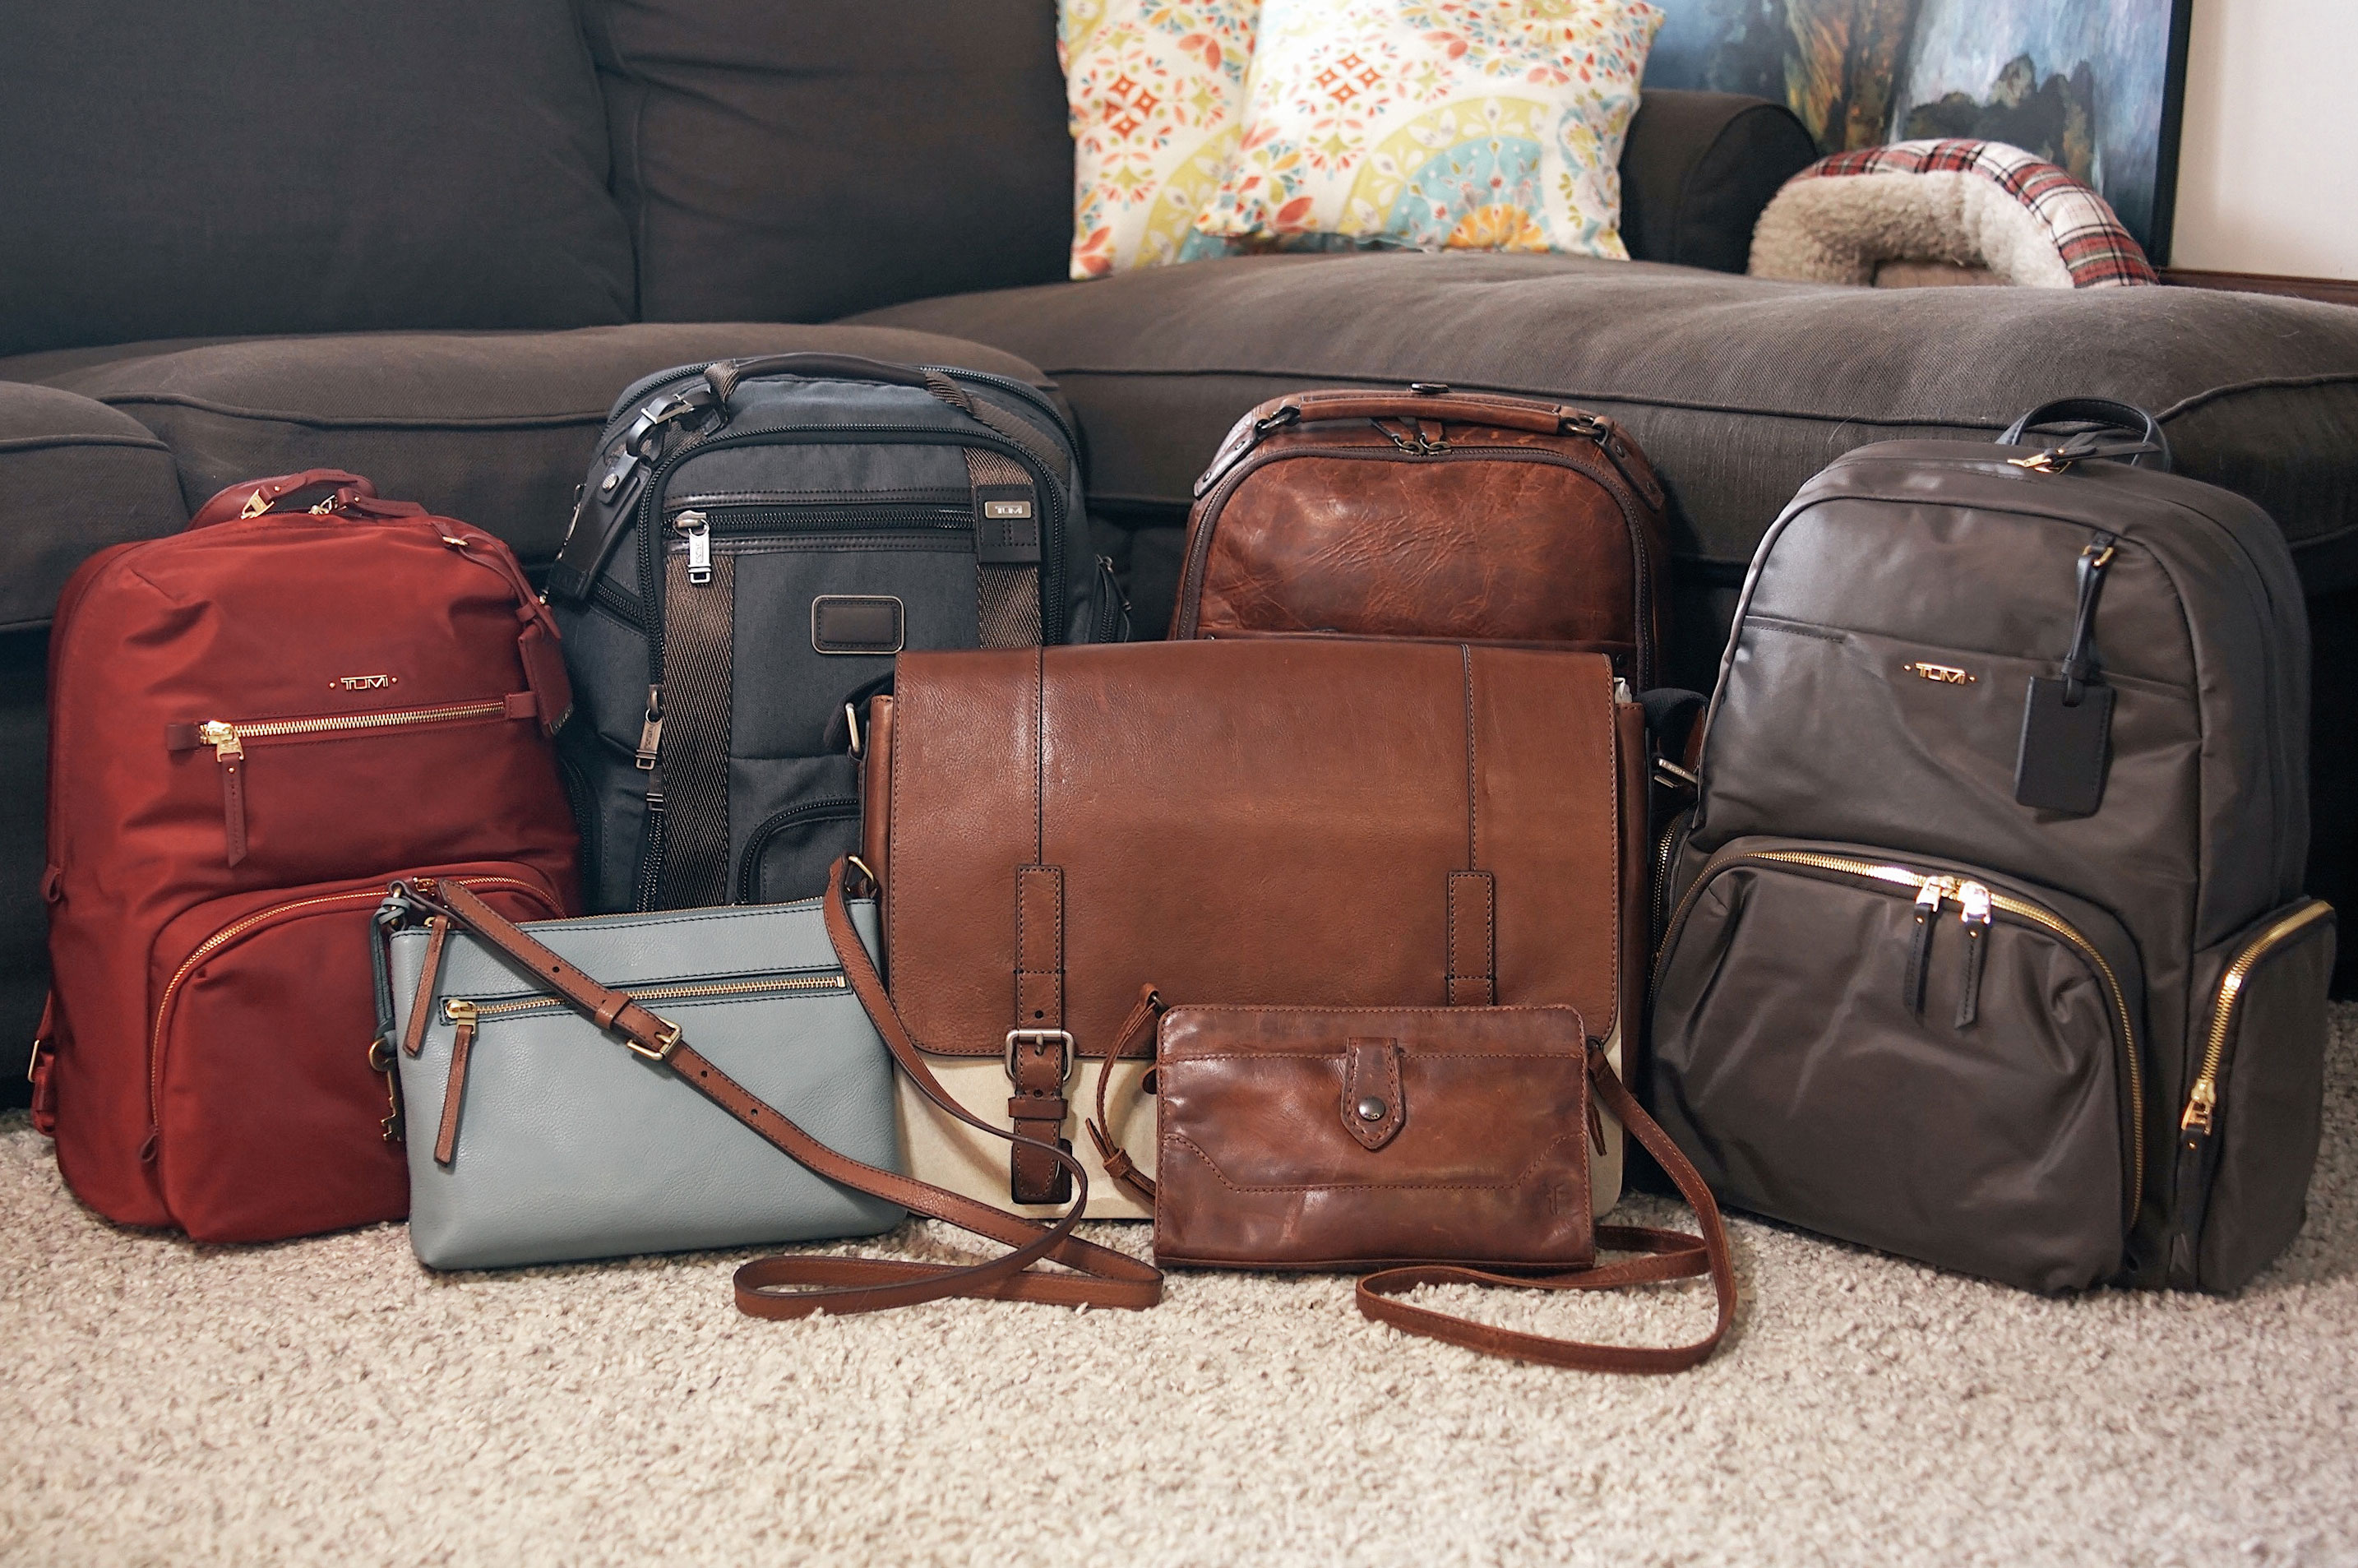 Eik capaciteit Sinis New Fall Fashion Bags from Fossil, Tumi, and Frye